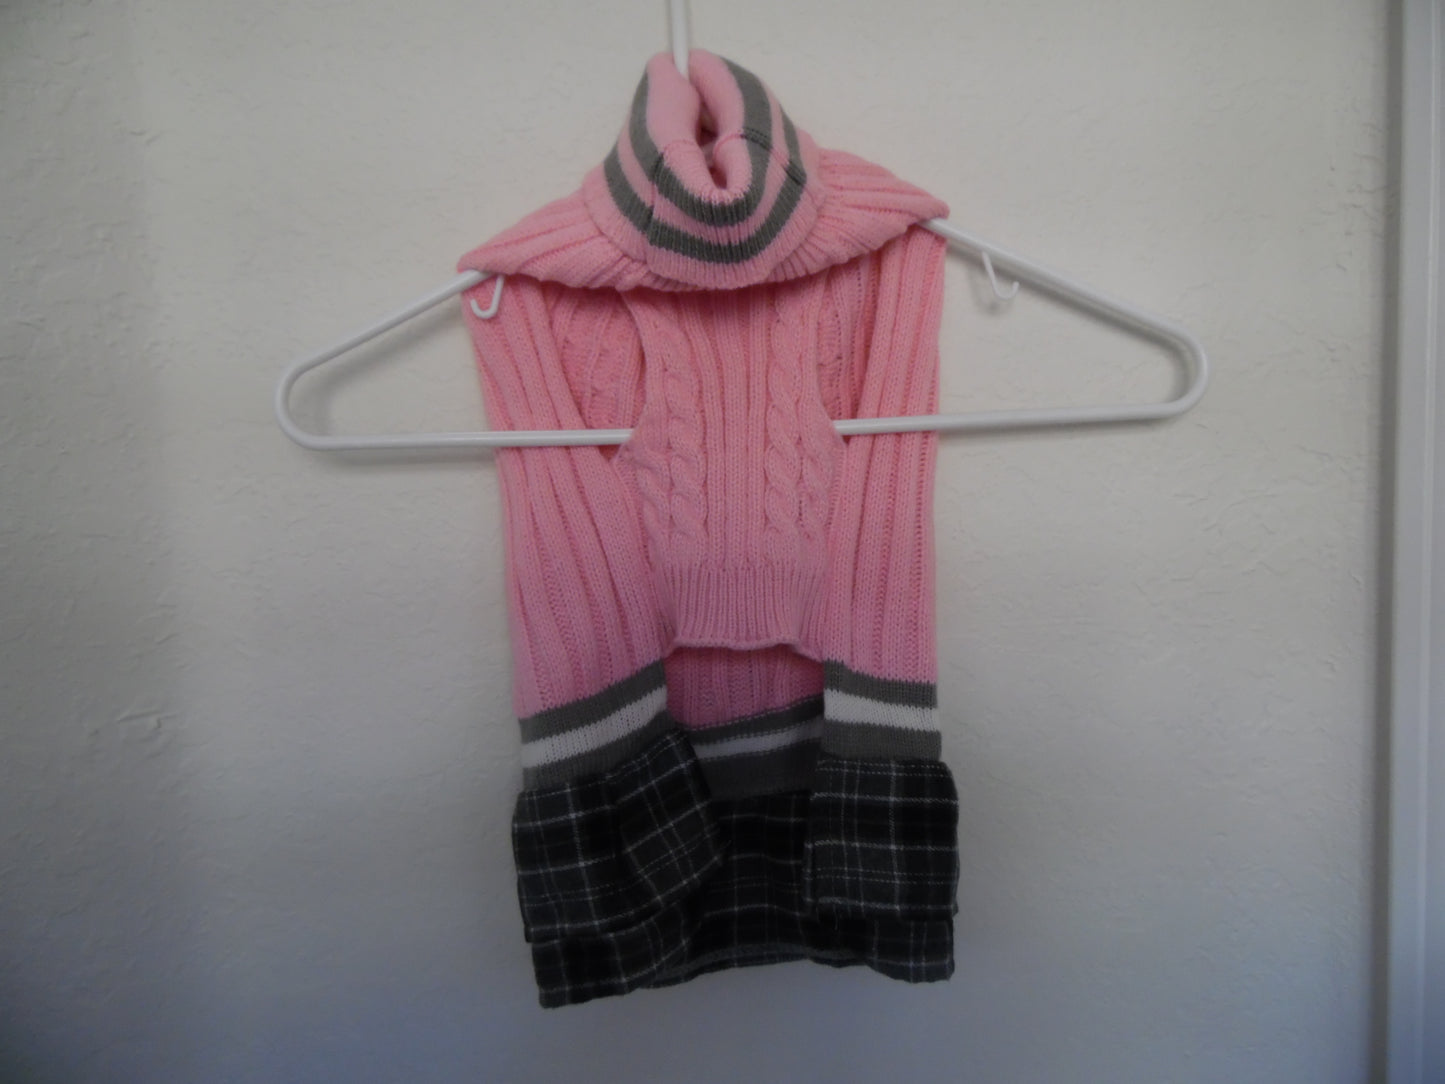 Pink & Gray Dog Sweater Dress with Bowtie Dog Turtleneck Pullover Knitwear for Small Dogs Girls Size Small